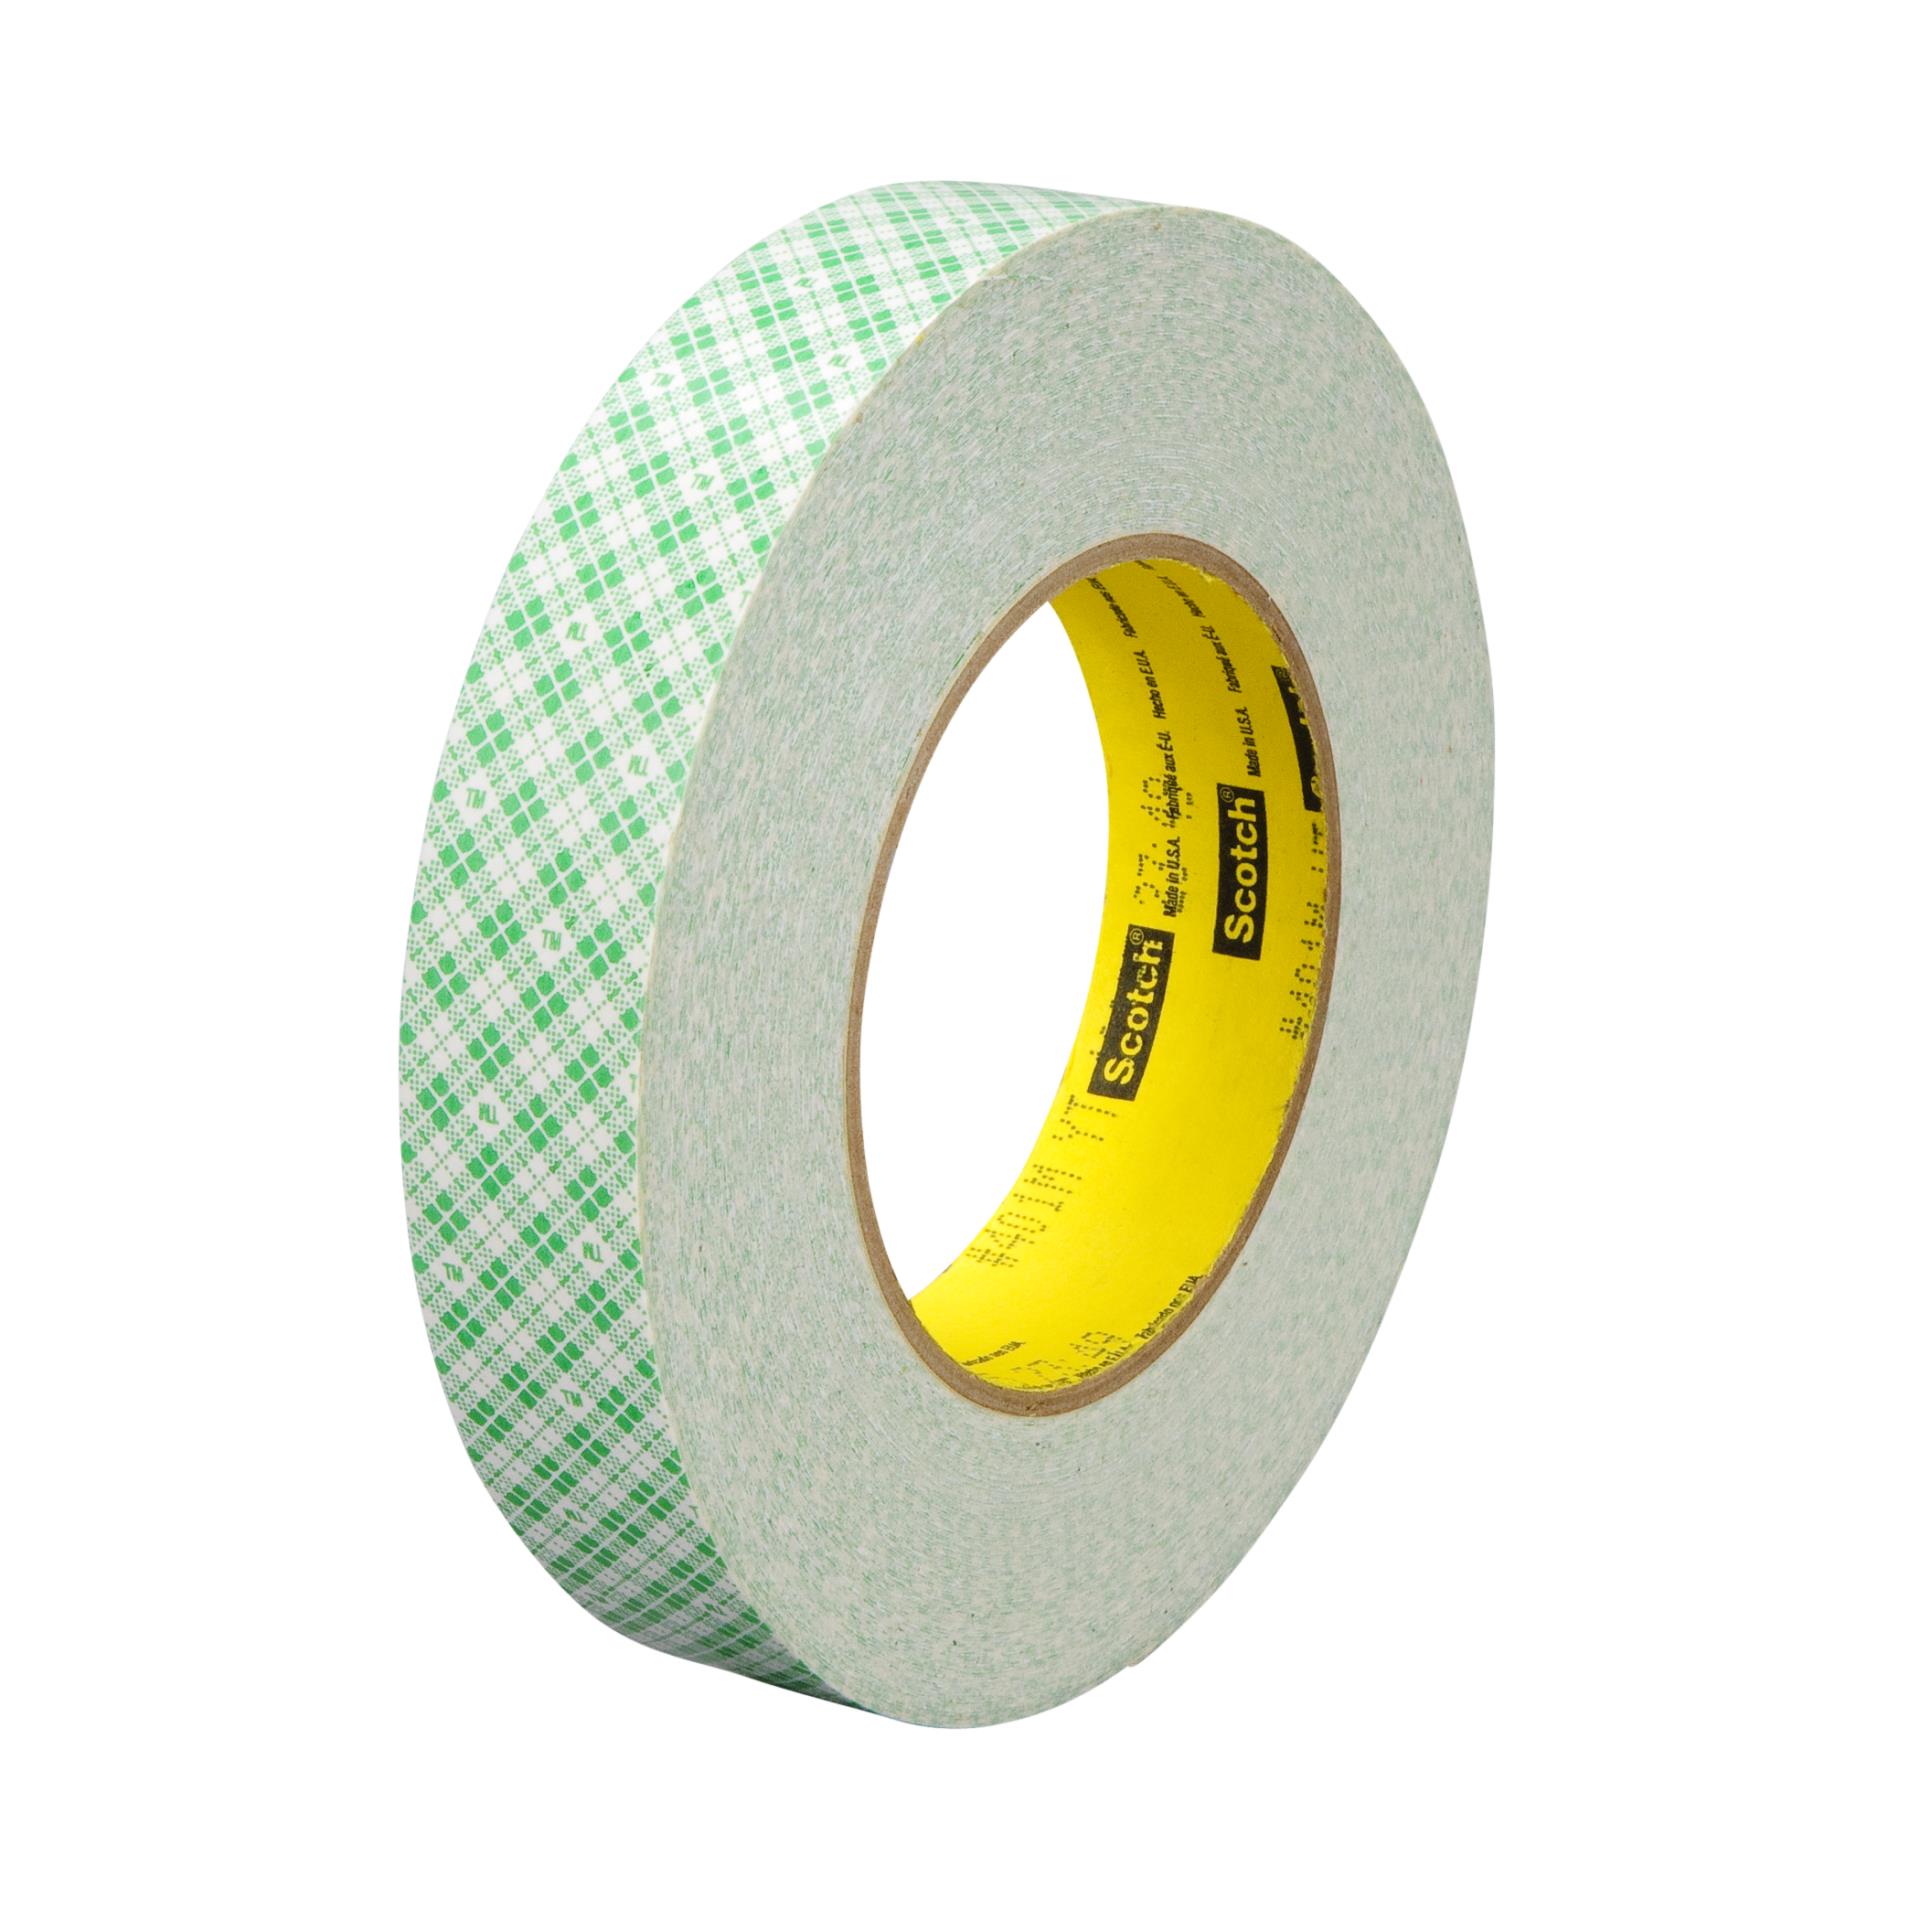 Double Coated Tissue Paper Tape 2 Inch x 55 Yards Double-Sided 48